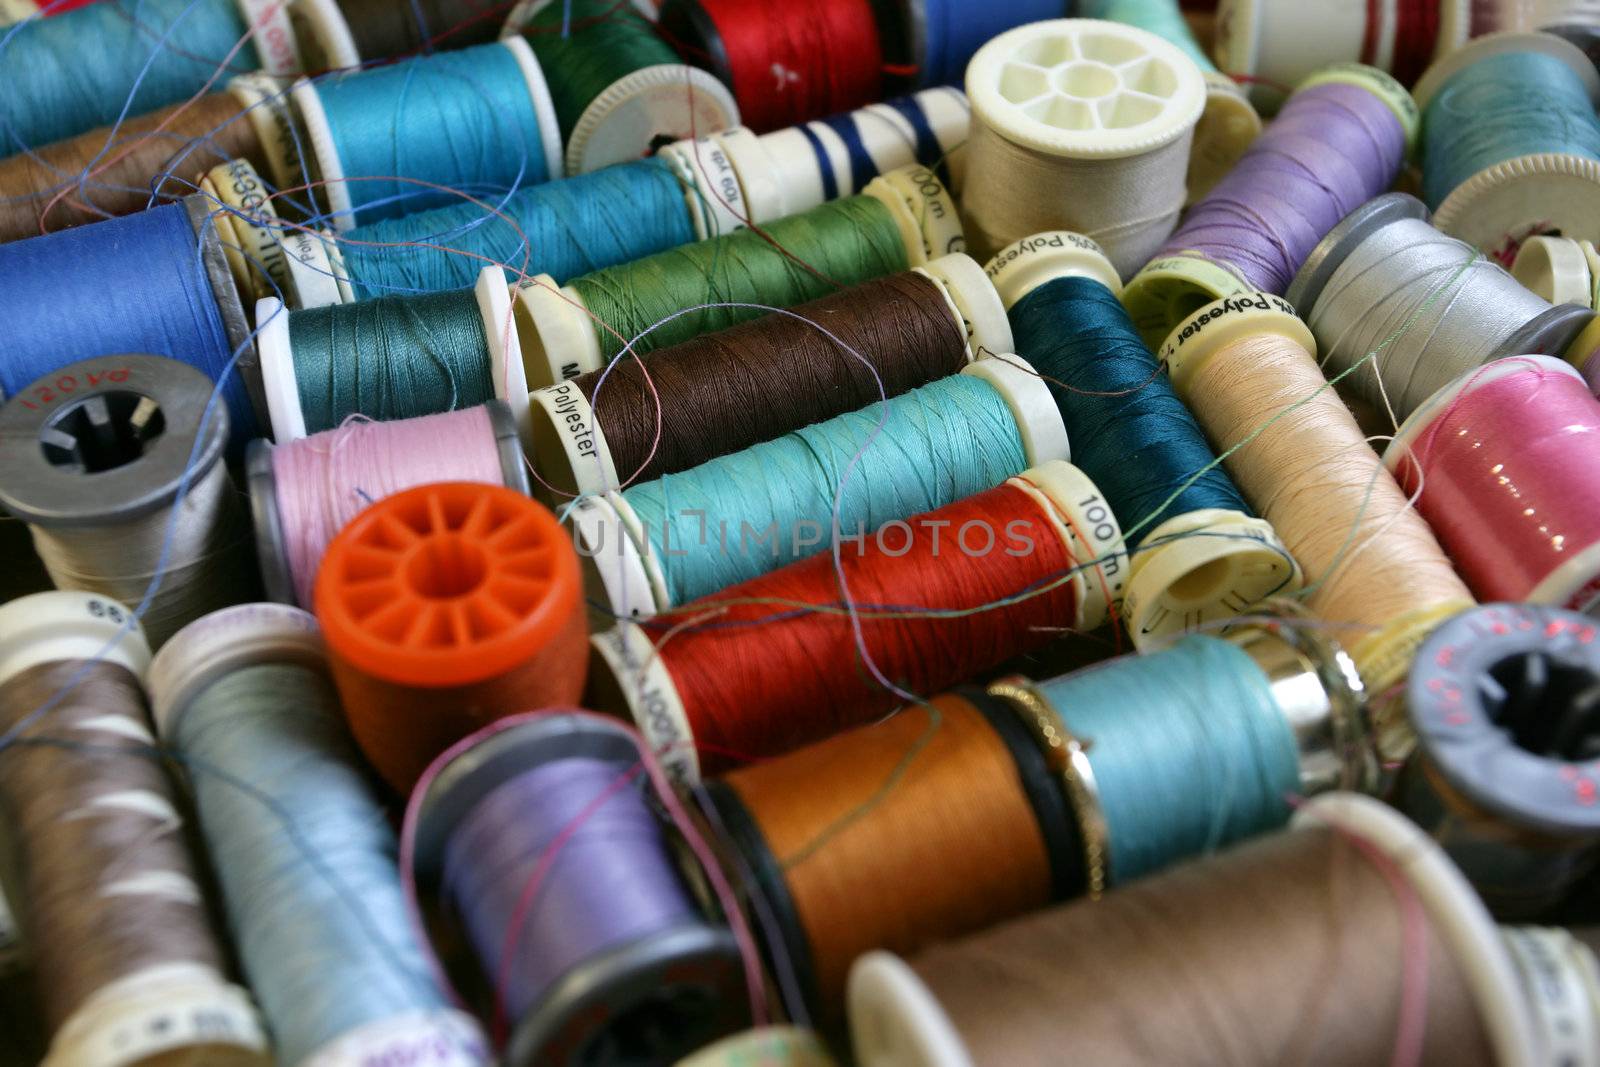 Colourful background assortment of bobbins and spools of thread. Shallow depth of field - focus in the middle.
